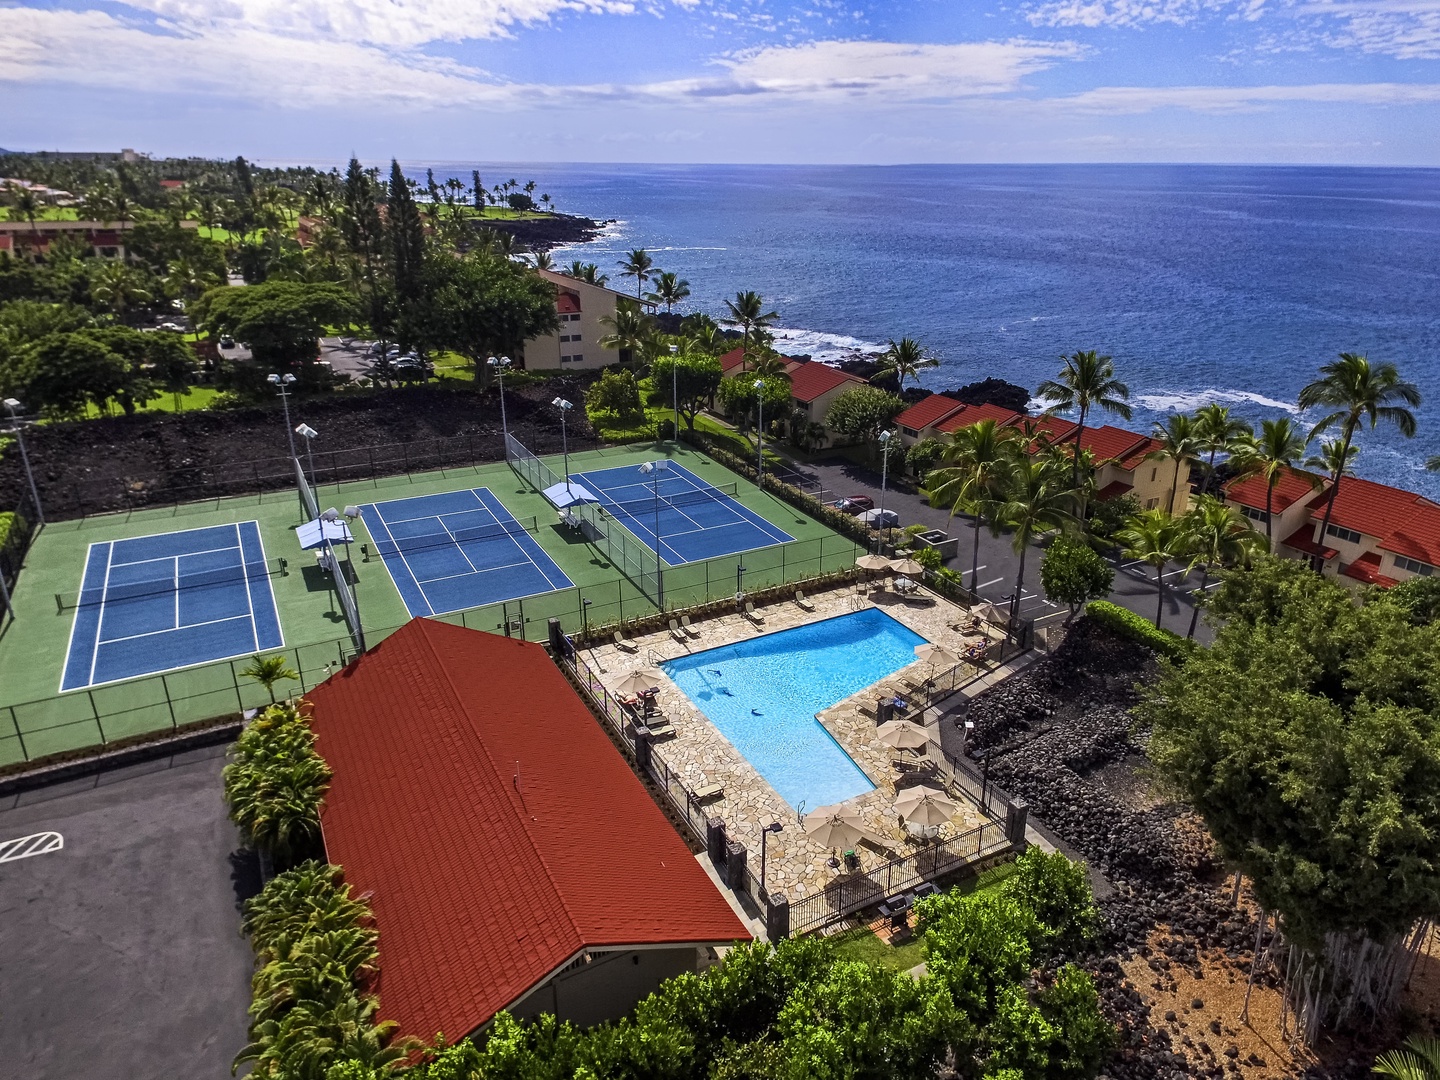 Kailua Kona Vacation Rentals, Keauhou Kona Surf & Racquet 2101 - Aerial view of the pool and of the tennis court nestled in lush greenery.